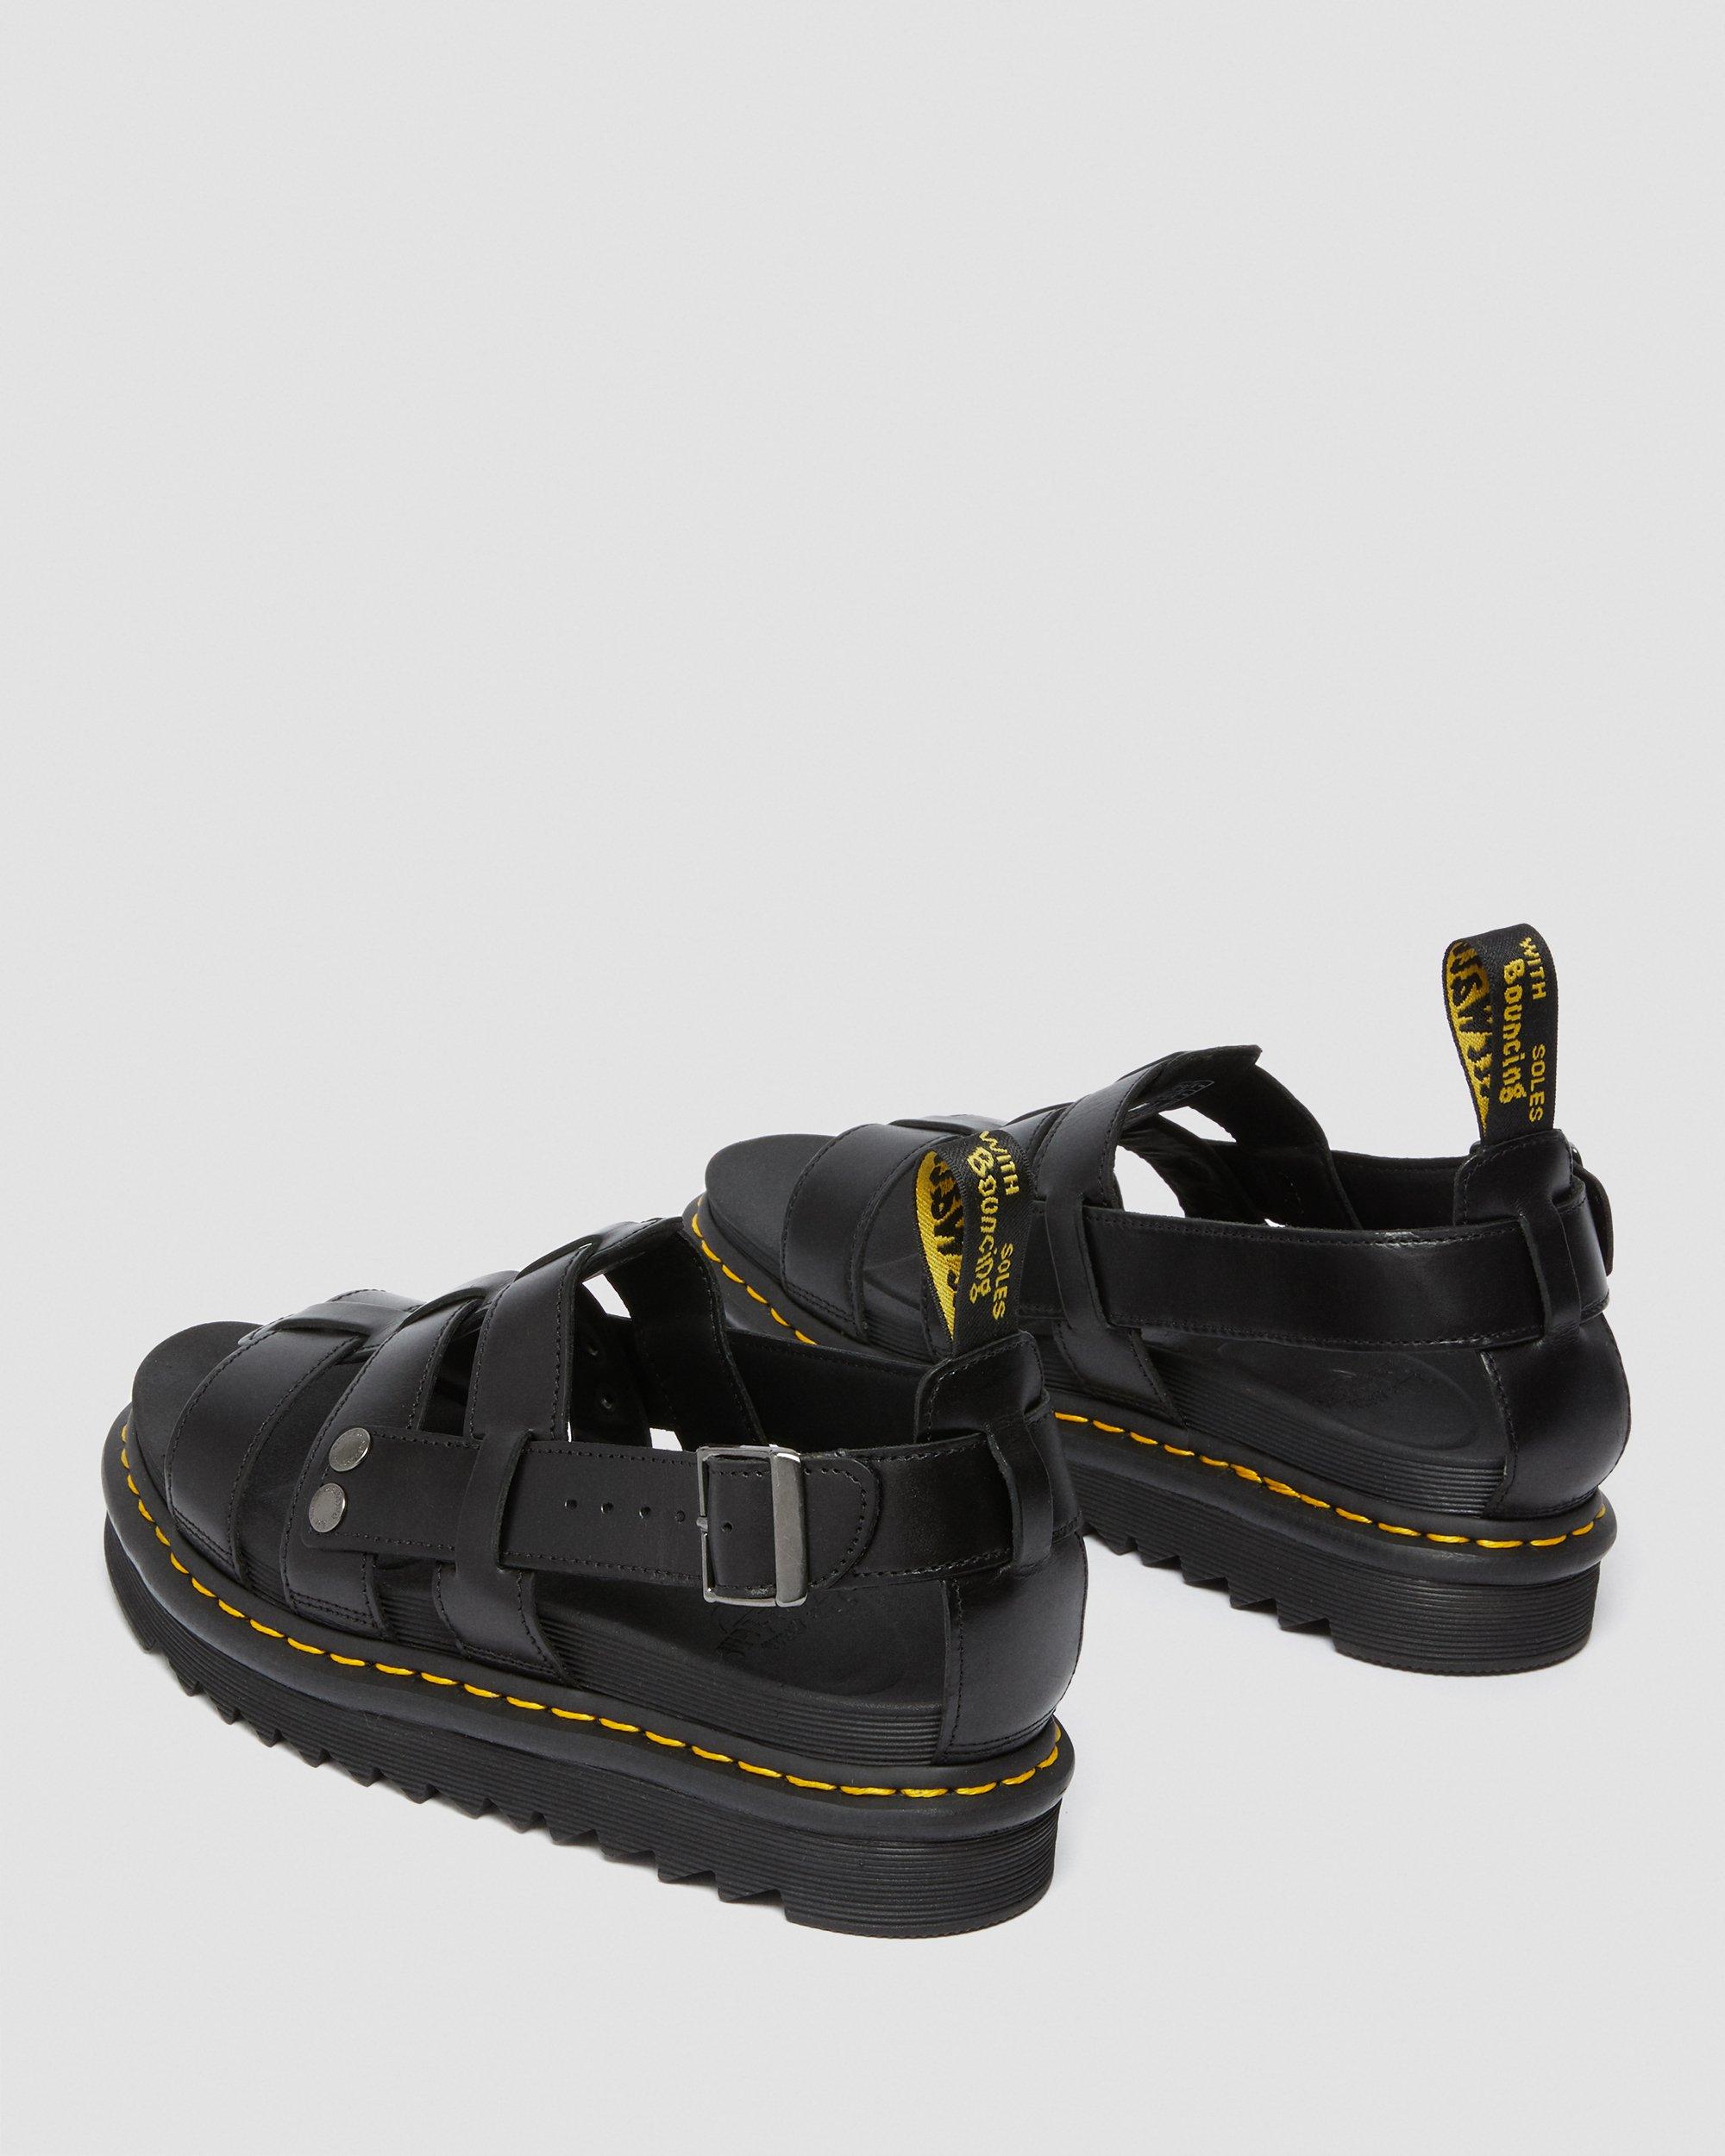 Terry Leather Strap Sandals in Black